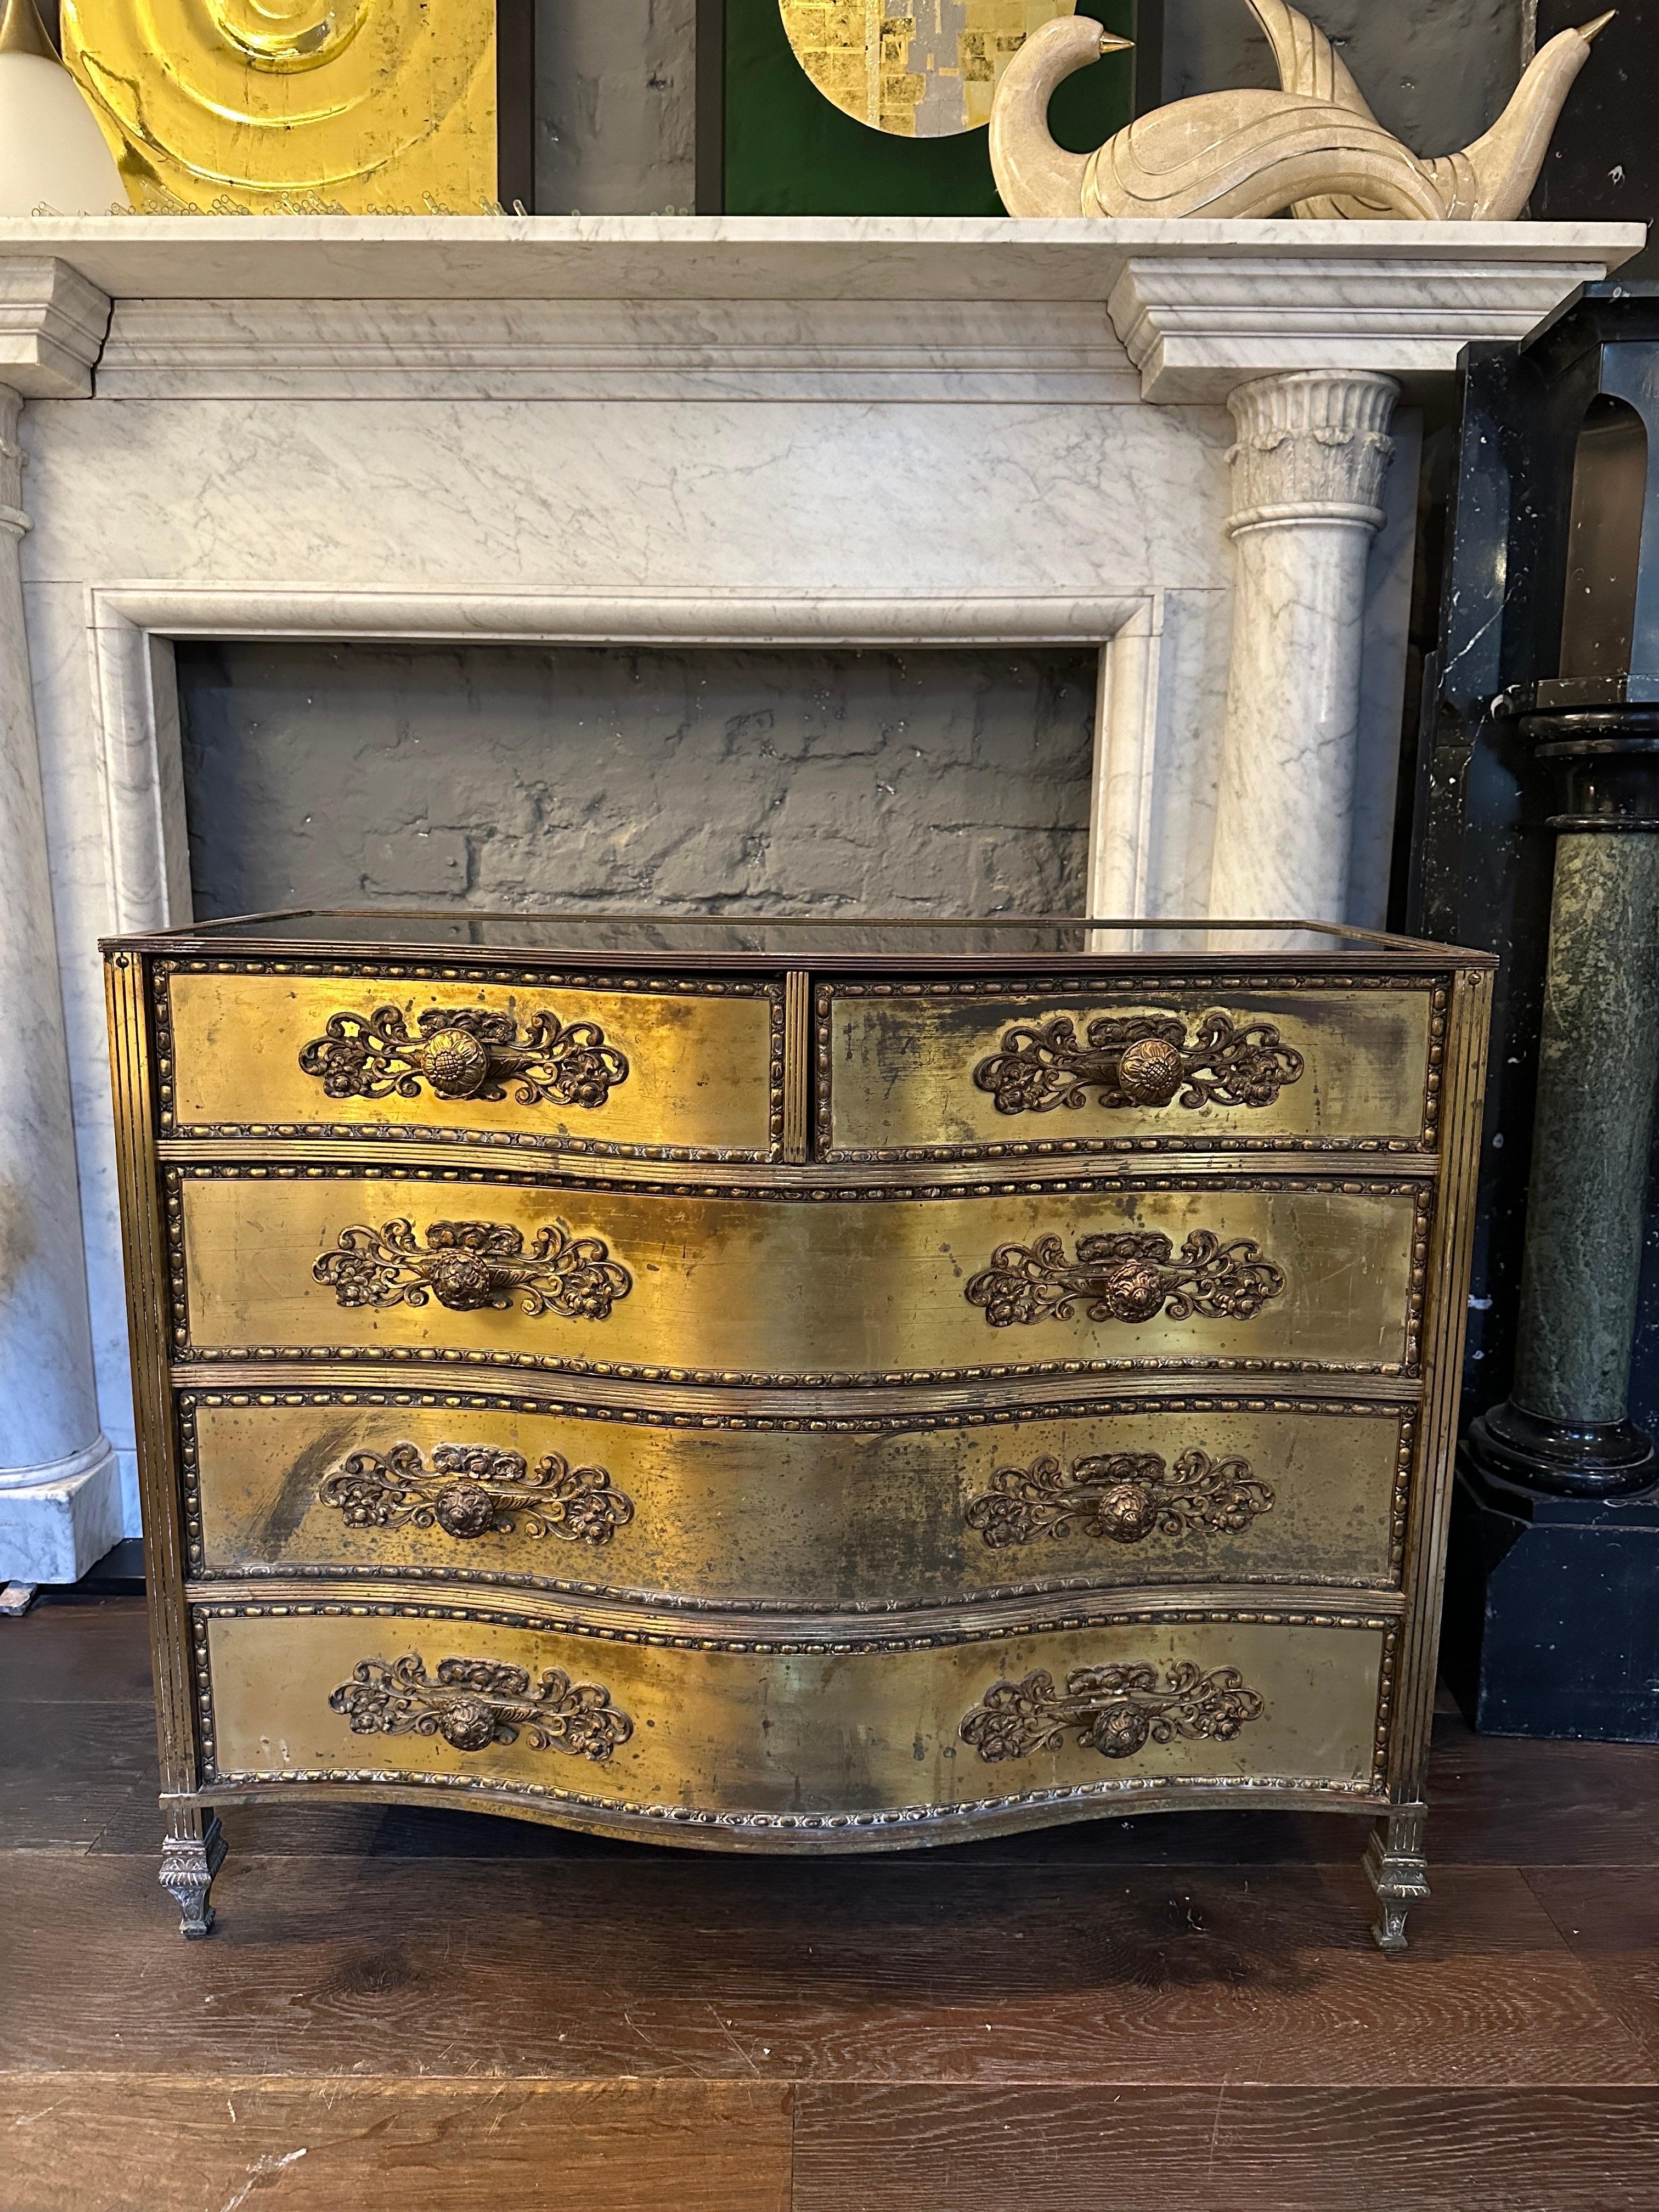 A gilt brass and black glass commode from the mid 20th century with gilt and now from age a rich worn patina bank of serpentine drawers. Having foliate scrolled mounts and decorative rosette handles. The reeded edges with black glass with to top and